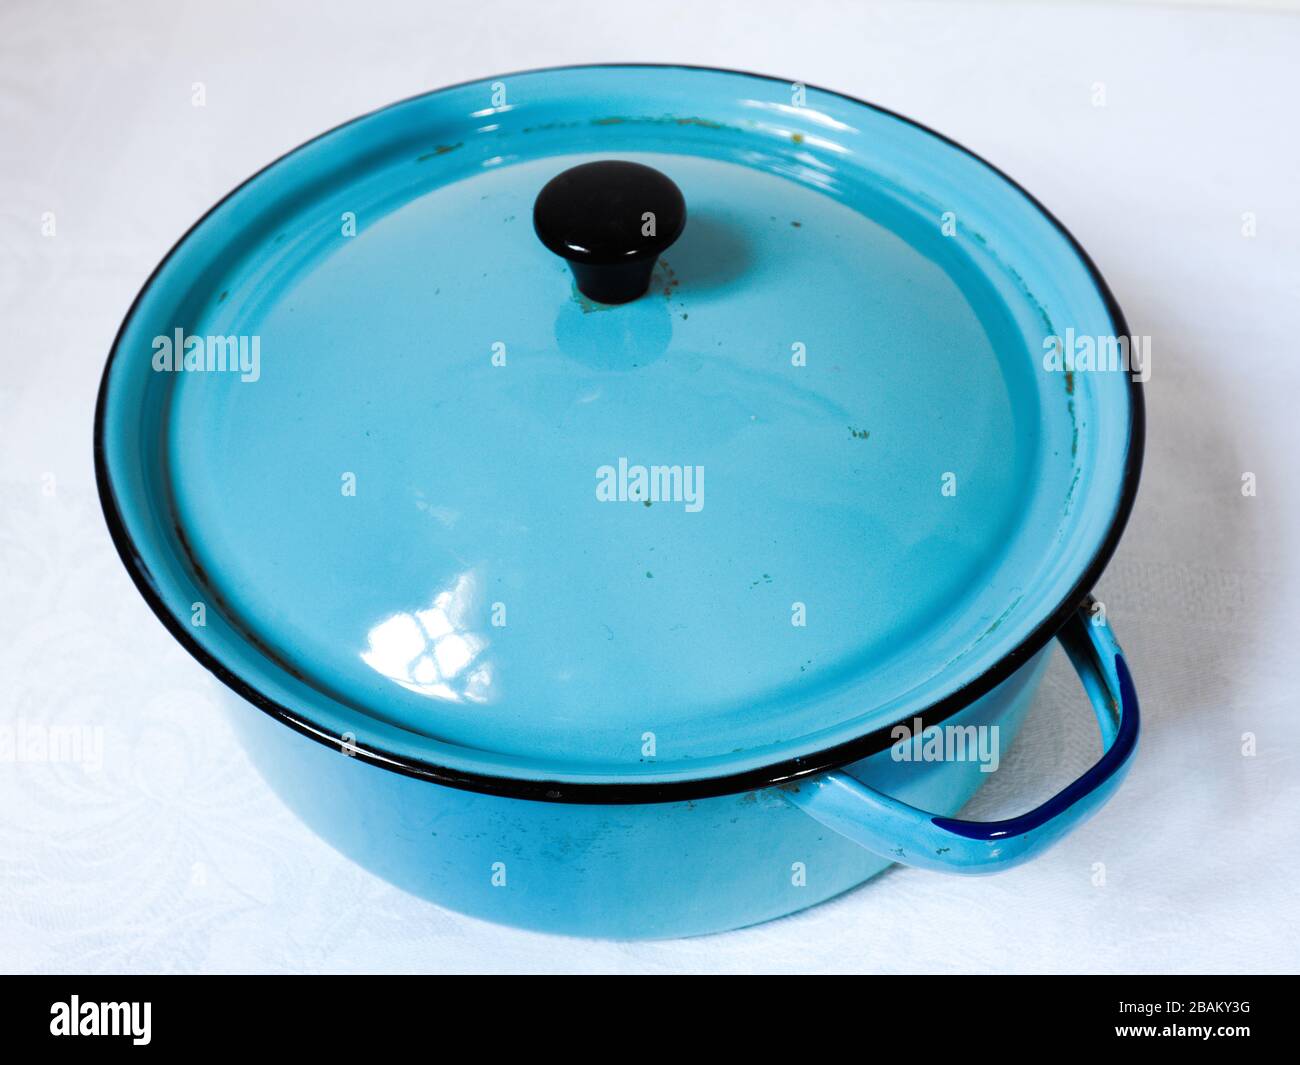 https://c8.alamy.com/comp/2BAKY3G/vintage-blue-enamelled-dish-with-lid-circa-1950so-used-for-cooking-very-retro-and-trendy-kitchenalia-2BAKY3G.jpg